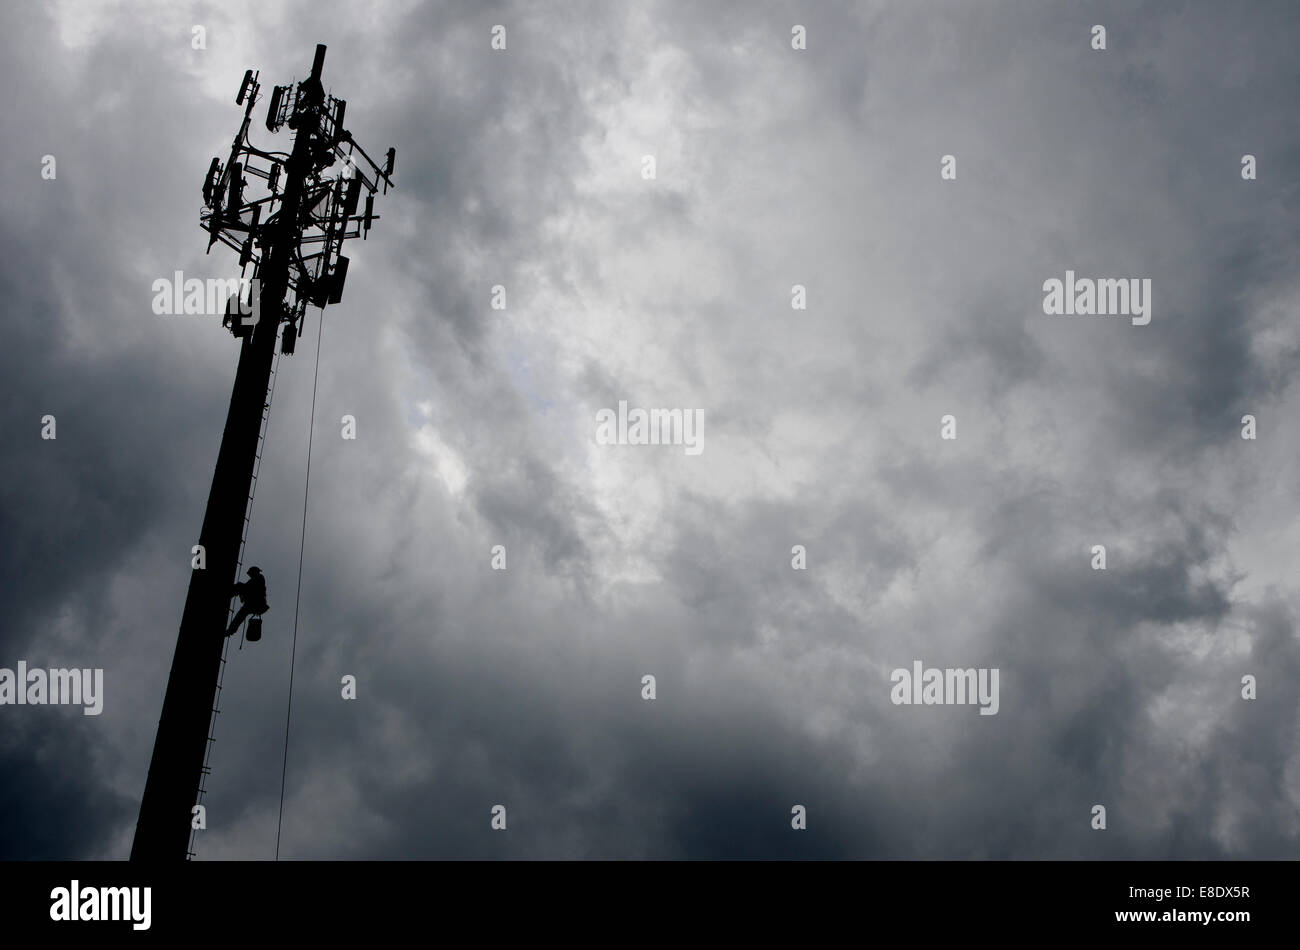 A tower construction worker makes his way down from the top of a Communications Tower to avoid an approaching thunderstorm. Stock Photo